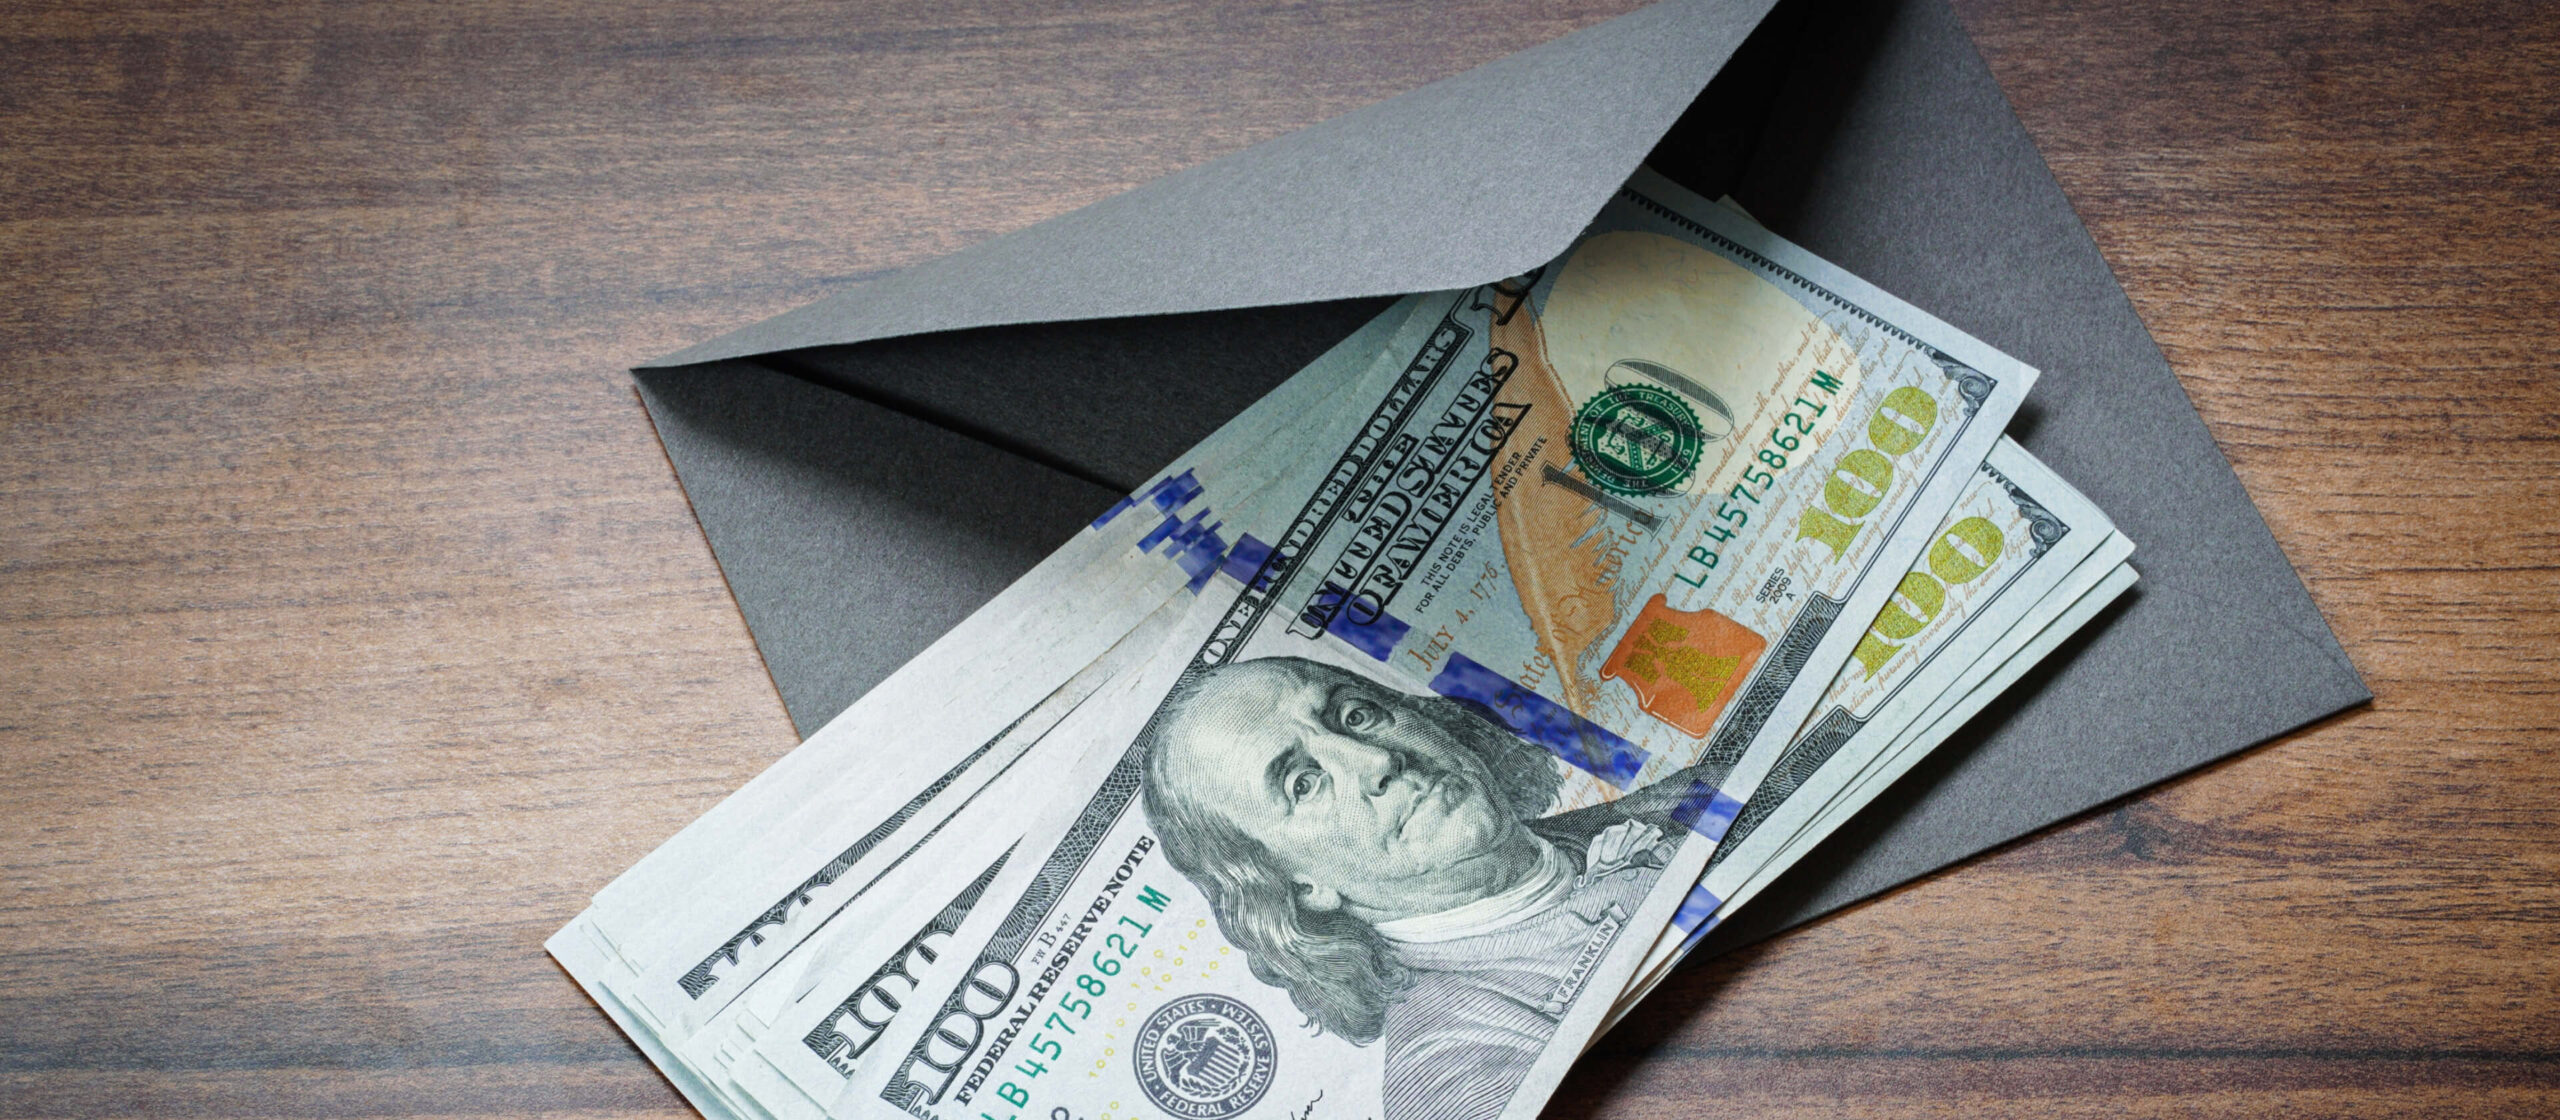 How Can I save $5,000 in 6 Months with Envelopes?